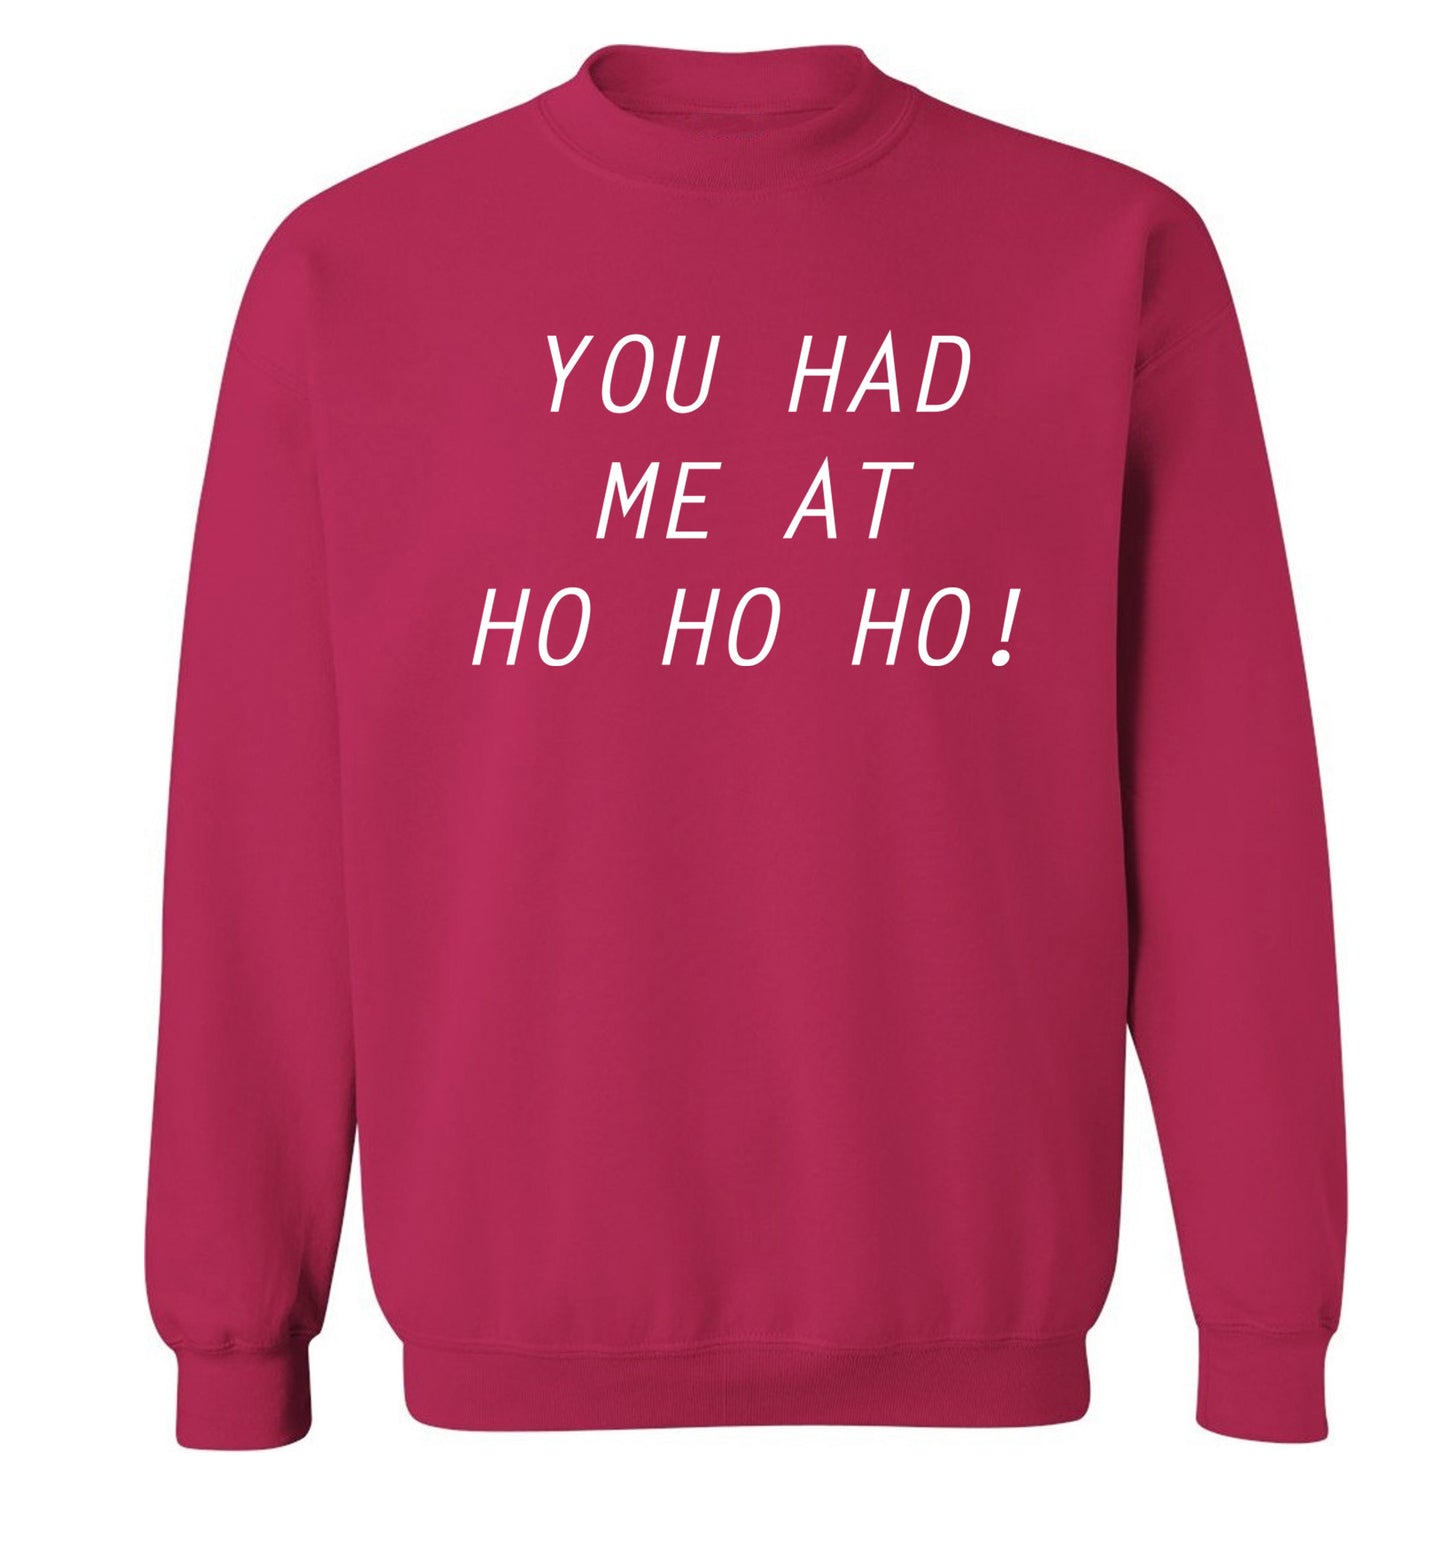 You had me at ho ho ho Adult's unisex pink Sweater 2XL